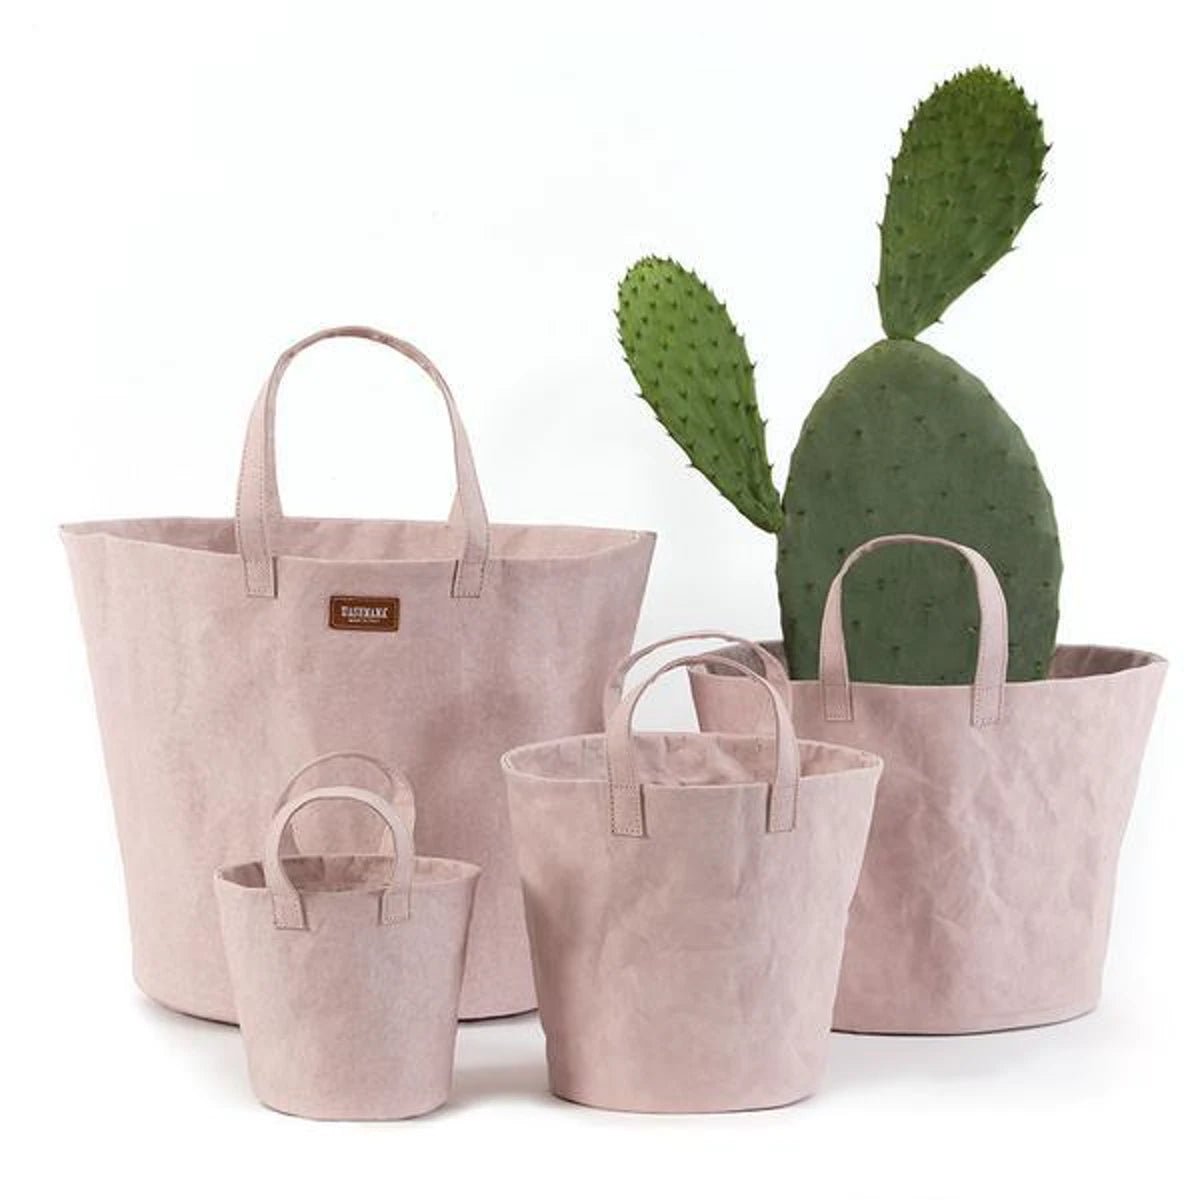 A selection of washable paper baskets are shown stacked in one another, in five varying sizes. They are shown in a pale pink colour.Four individual washable paper baskets are shown in varying sizes. The one at right contains a large cactus, and they are shown in a pale pink colour.